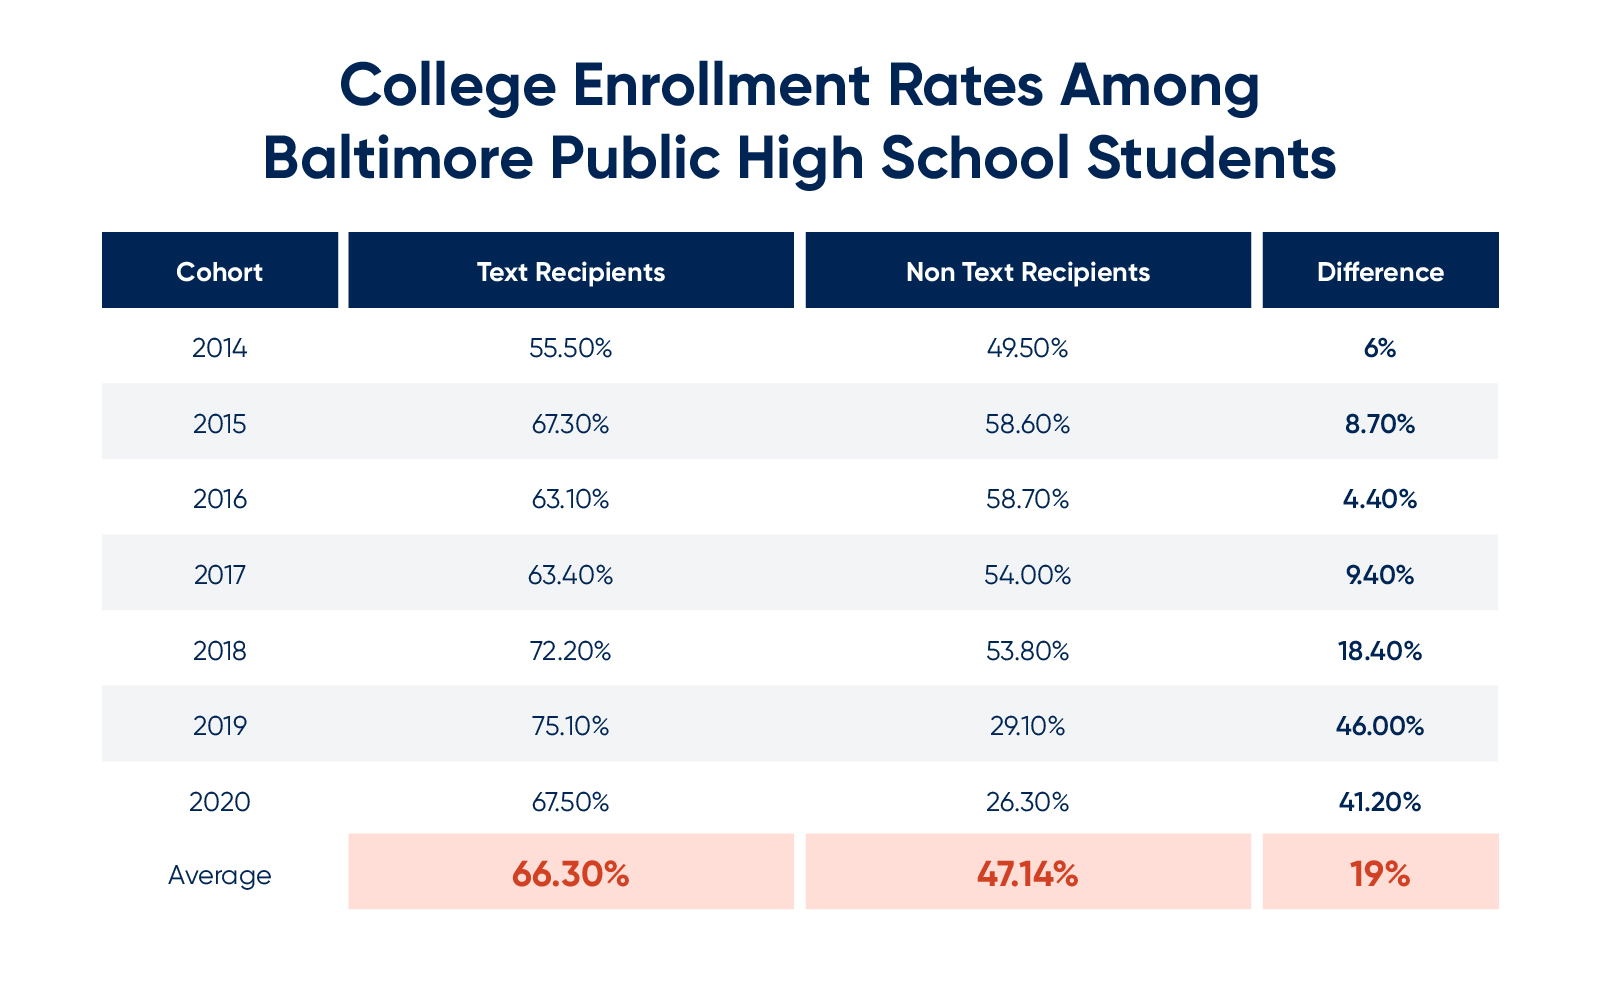 data chart showing that enrollment rates among students who did and did not recieve texts from 2014 to 2020